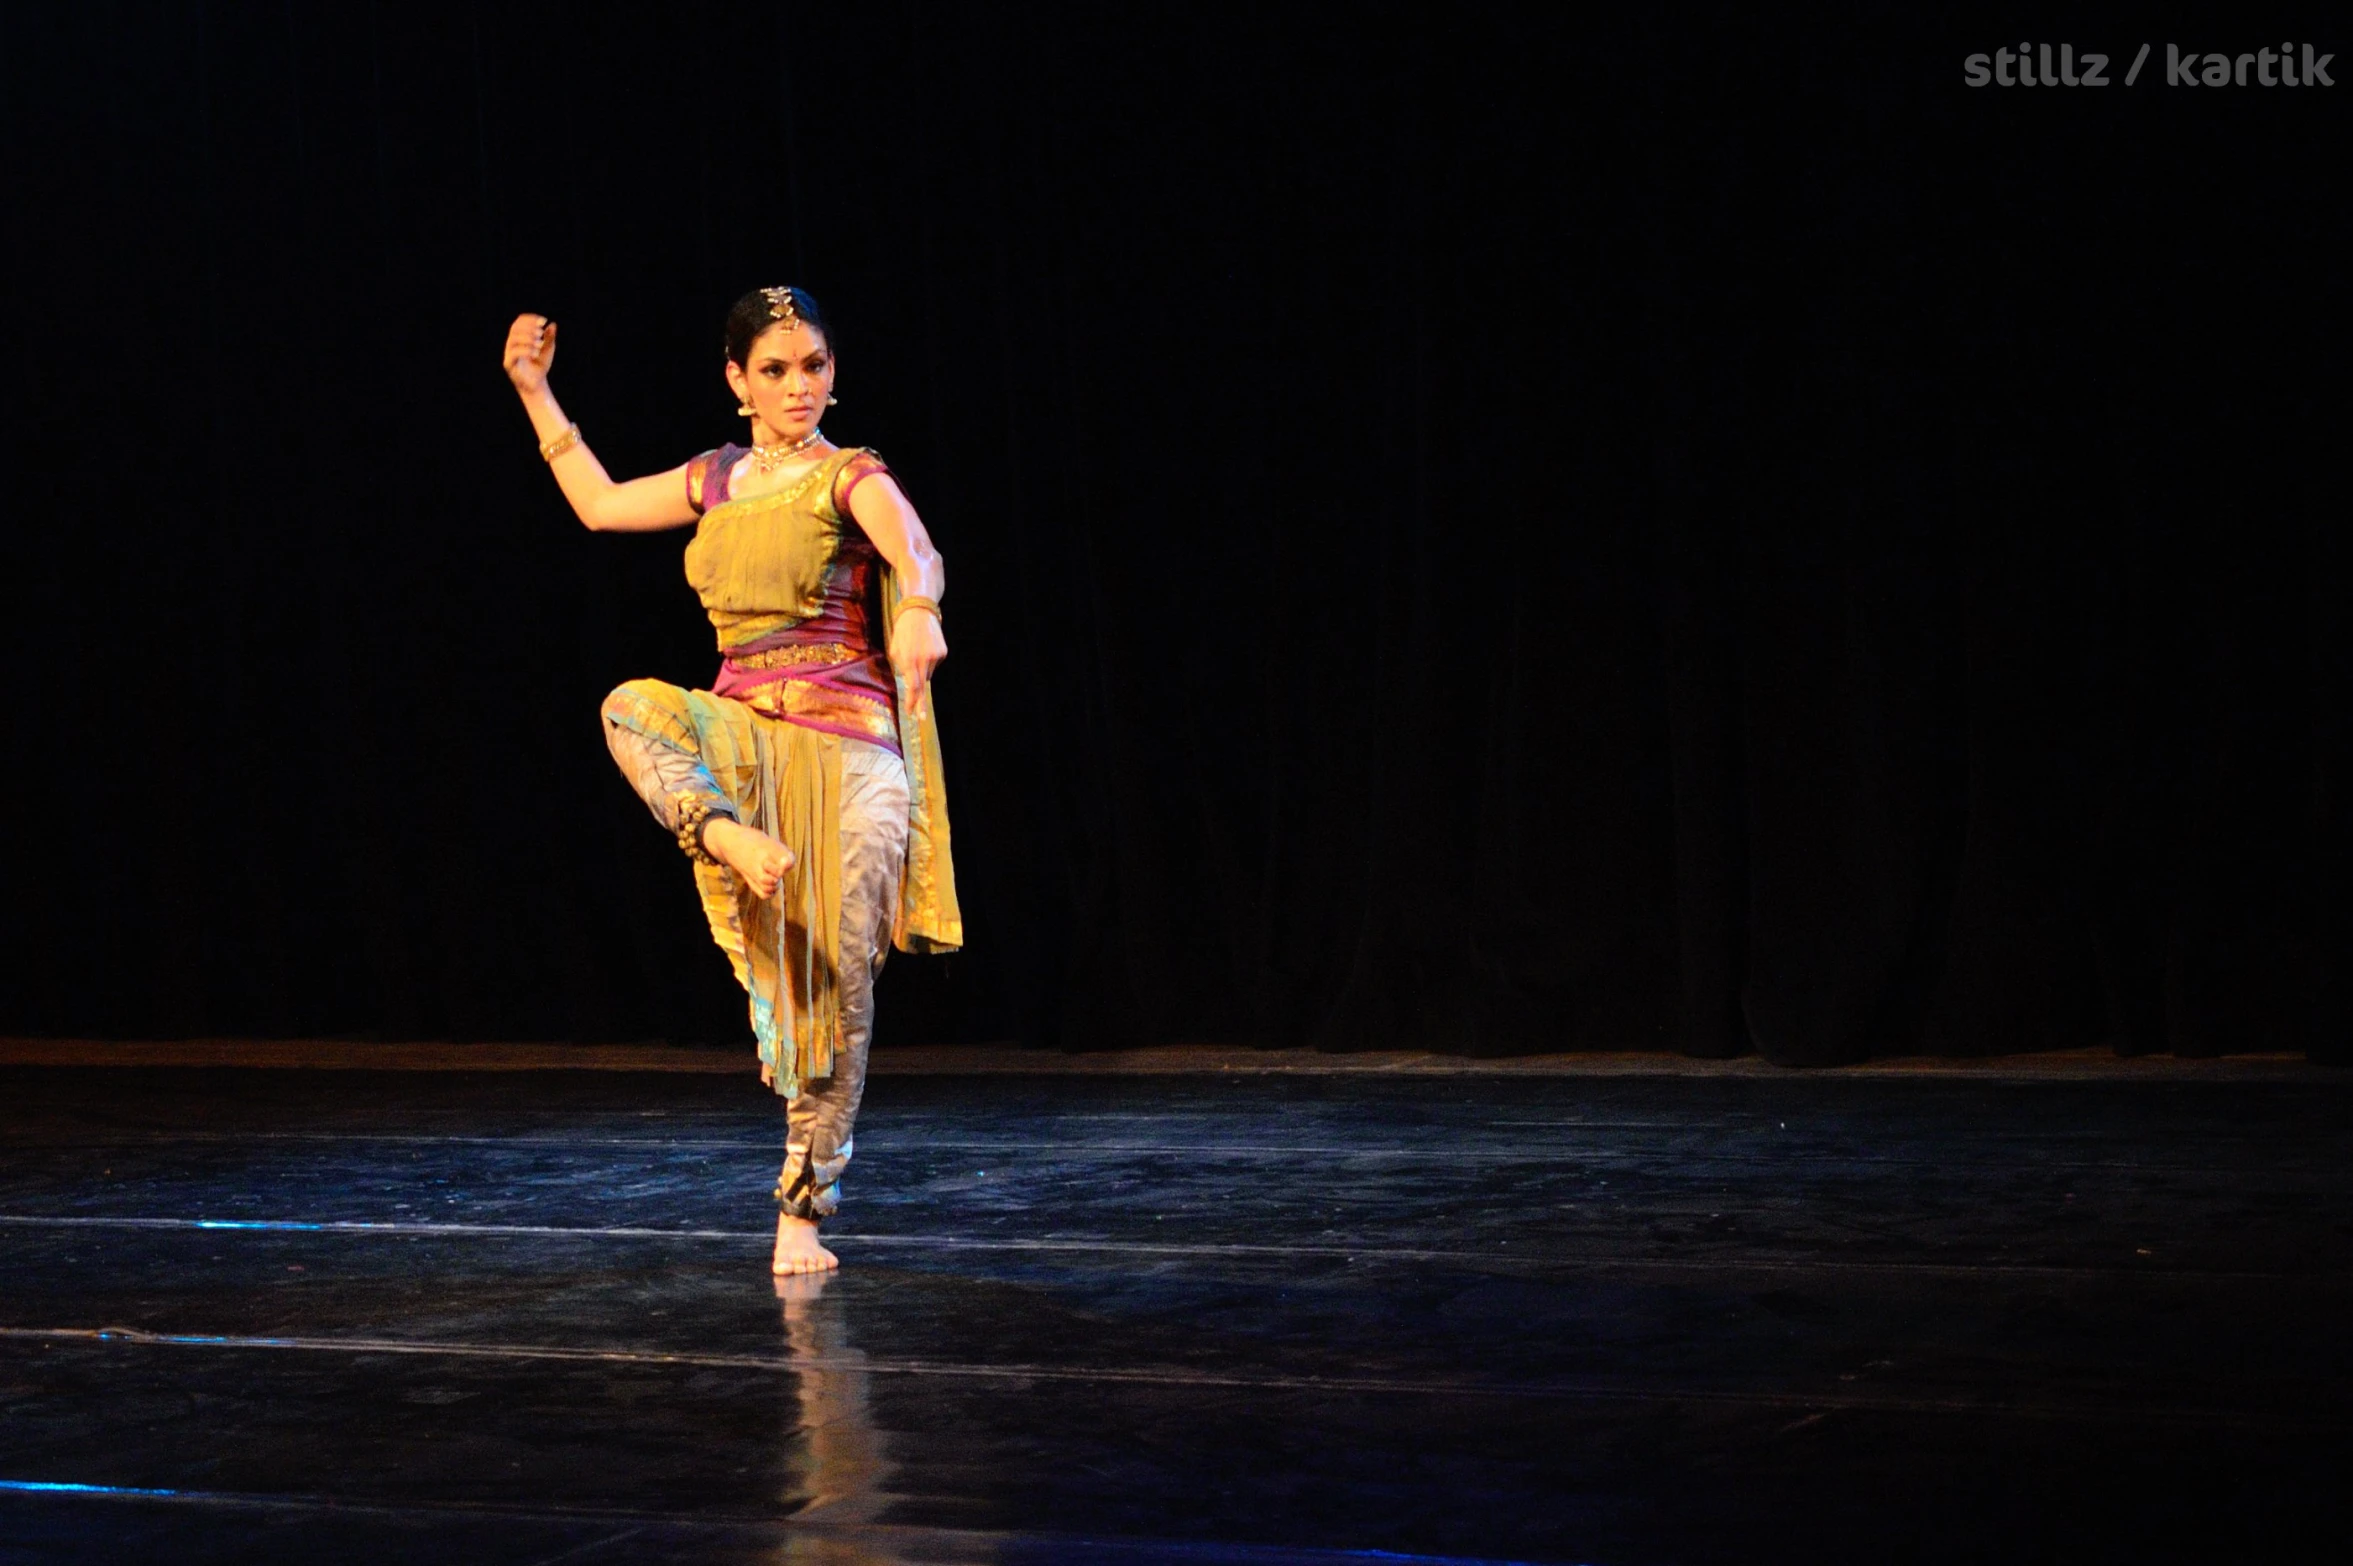 a woman dancing on a stage, with one leg up